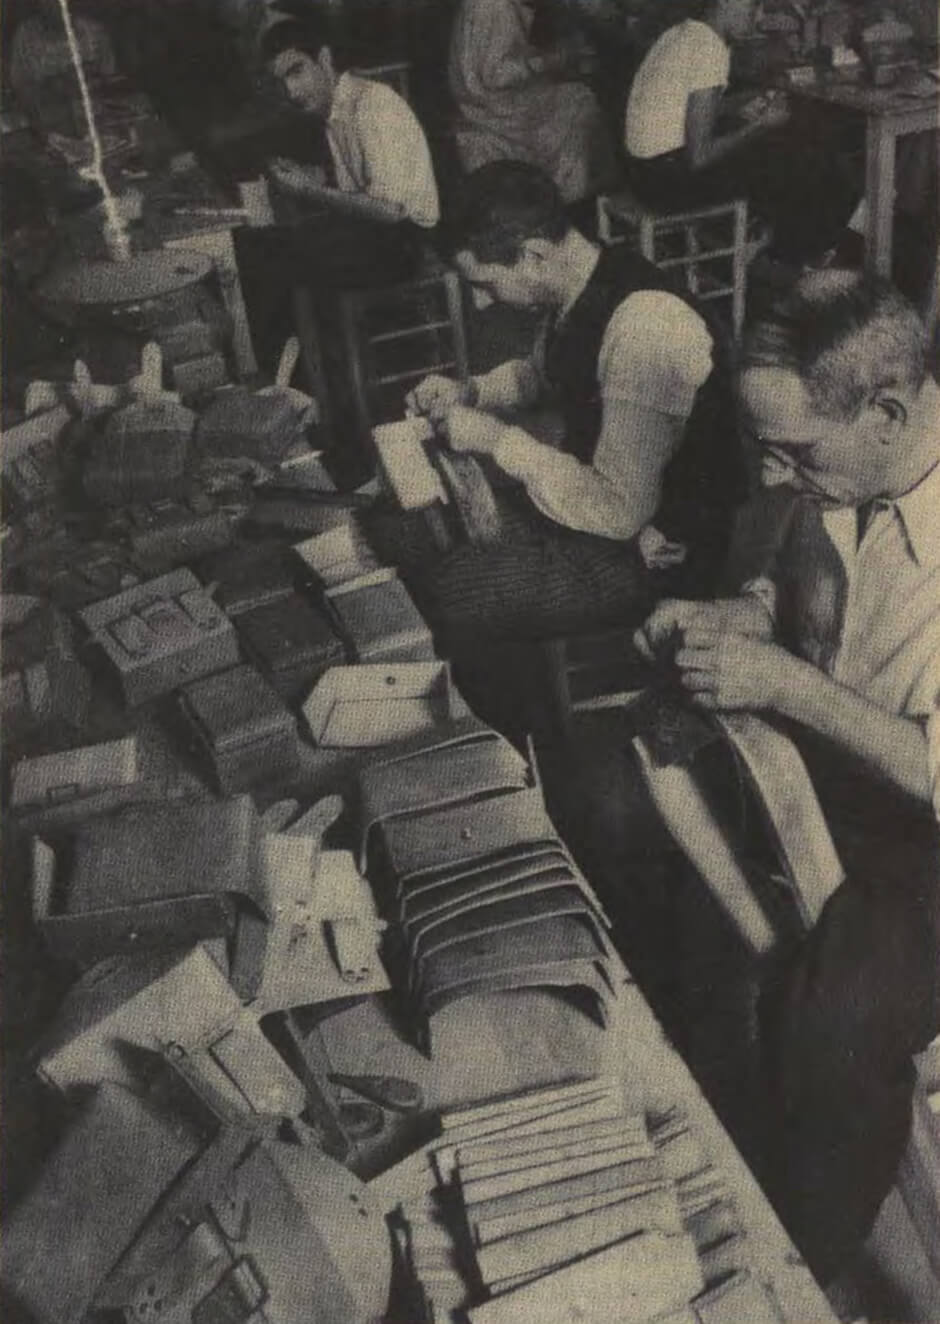 Art Canada Institute, Spanish factory workers [flopped], c. 1936, photograph by Joan P. Fabregas, reprinted in Nova Iberia 1 (January, 1937)